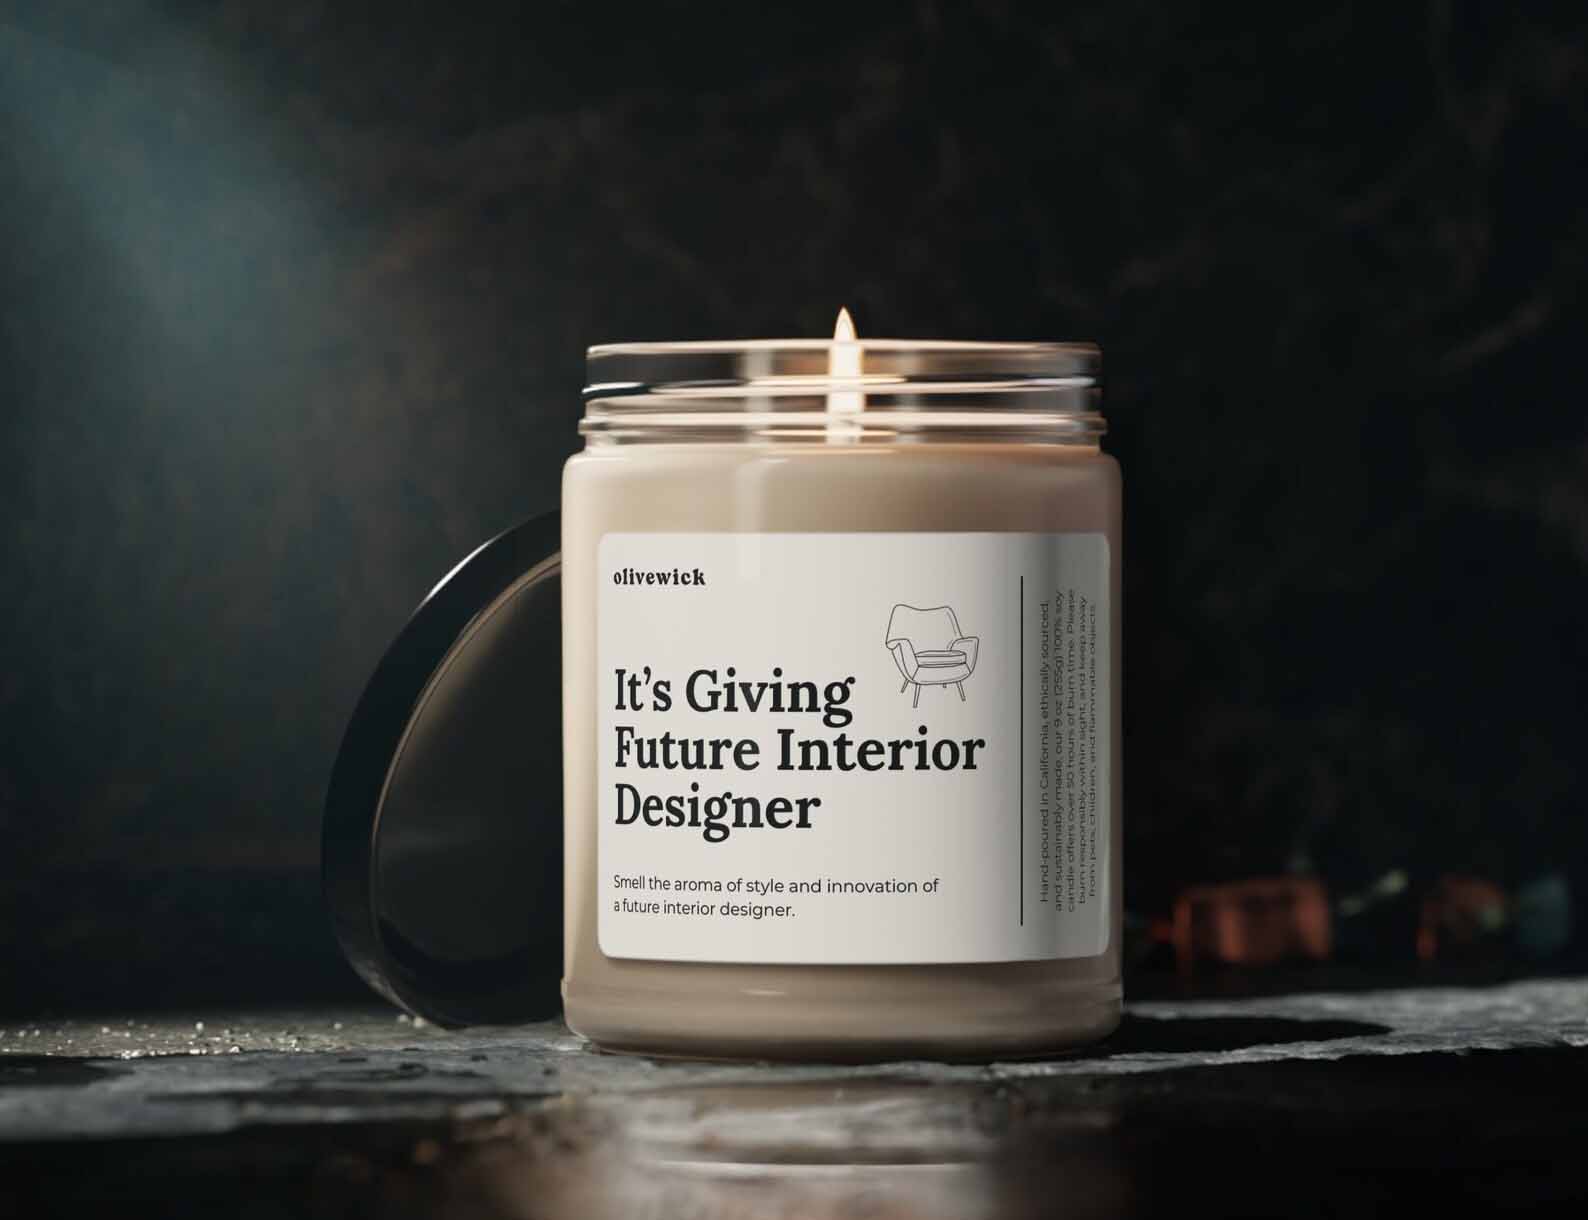 Modern Gift Idea - A soy wax candle for a future interior designer.